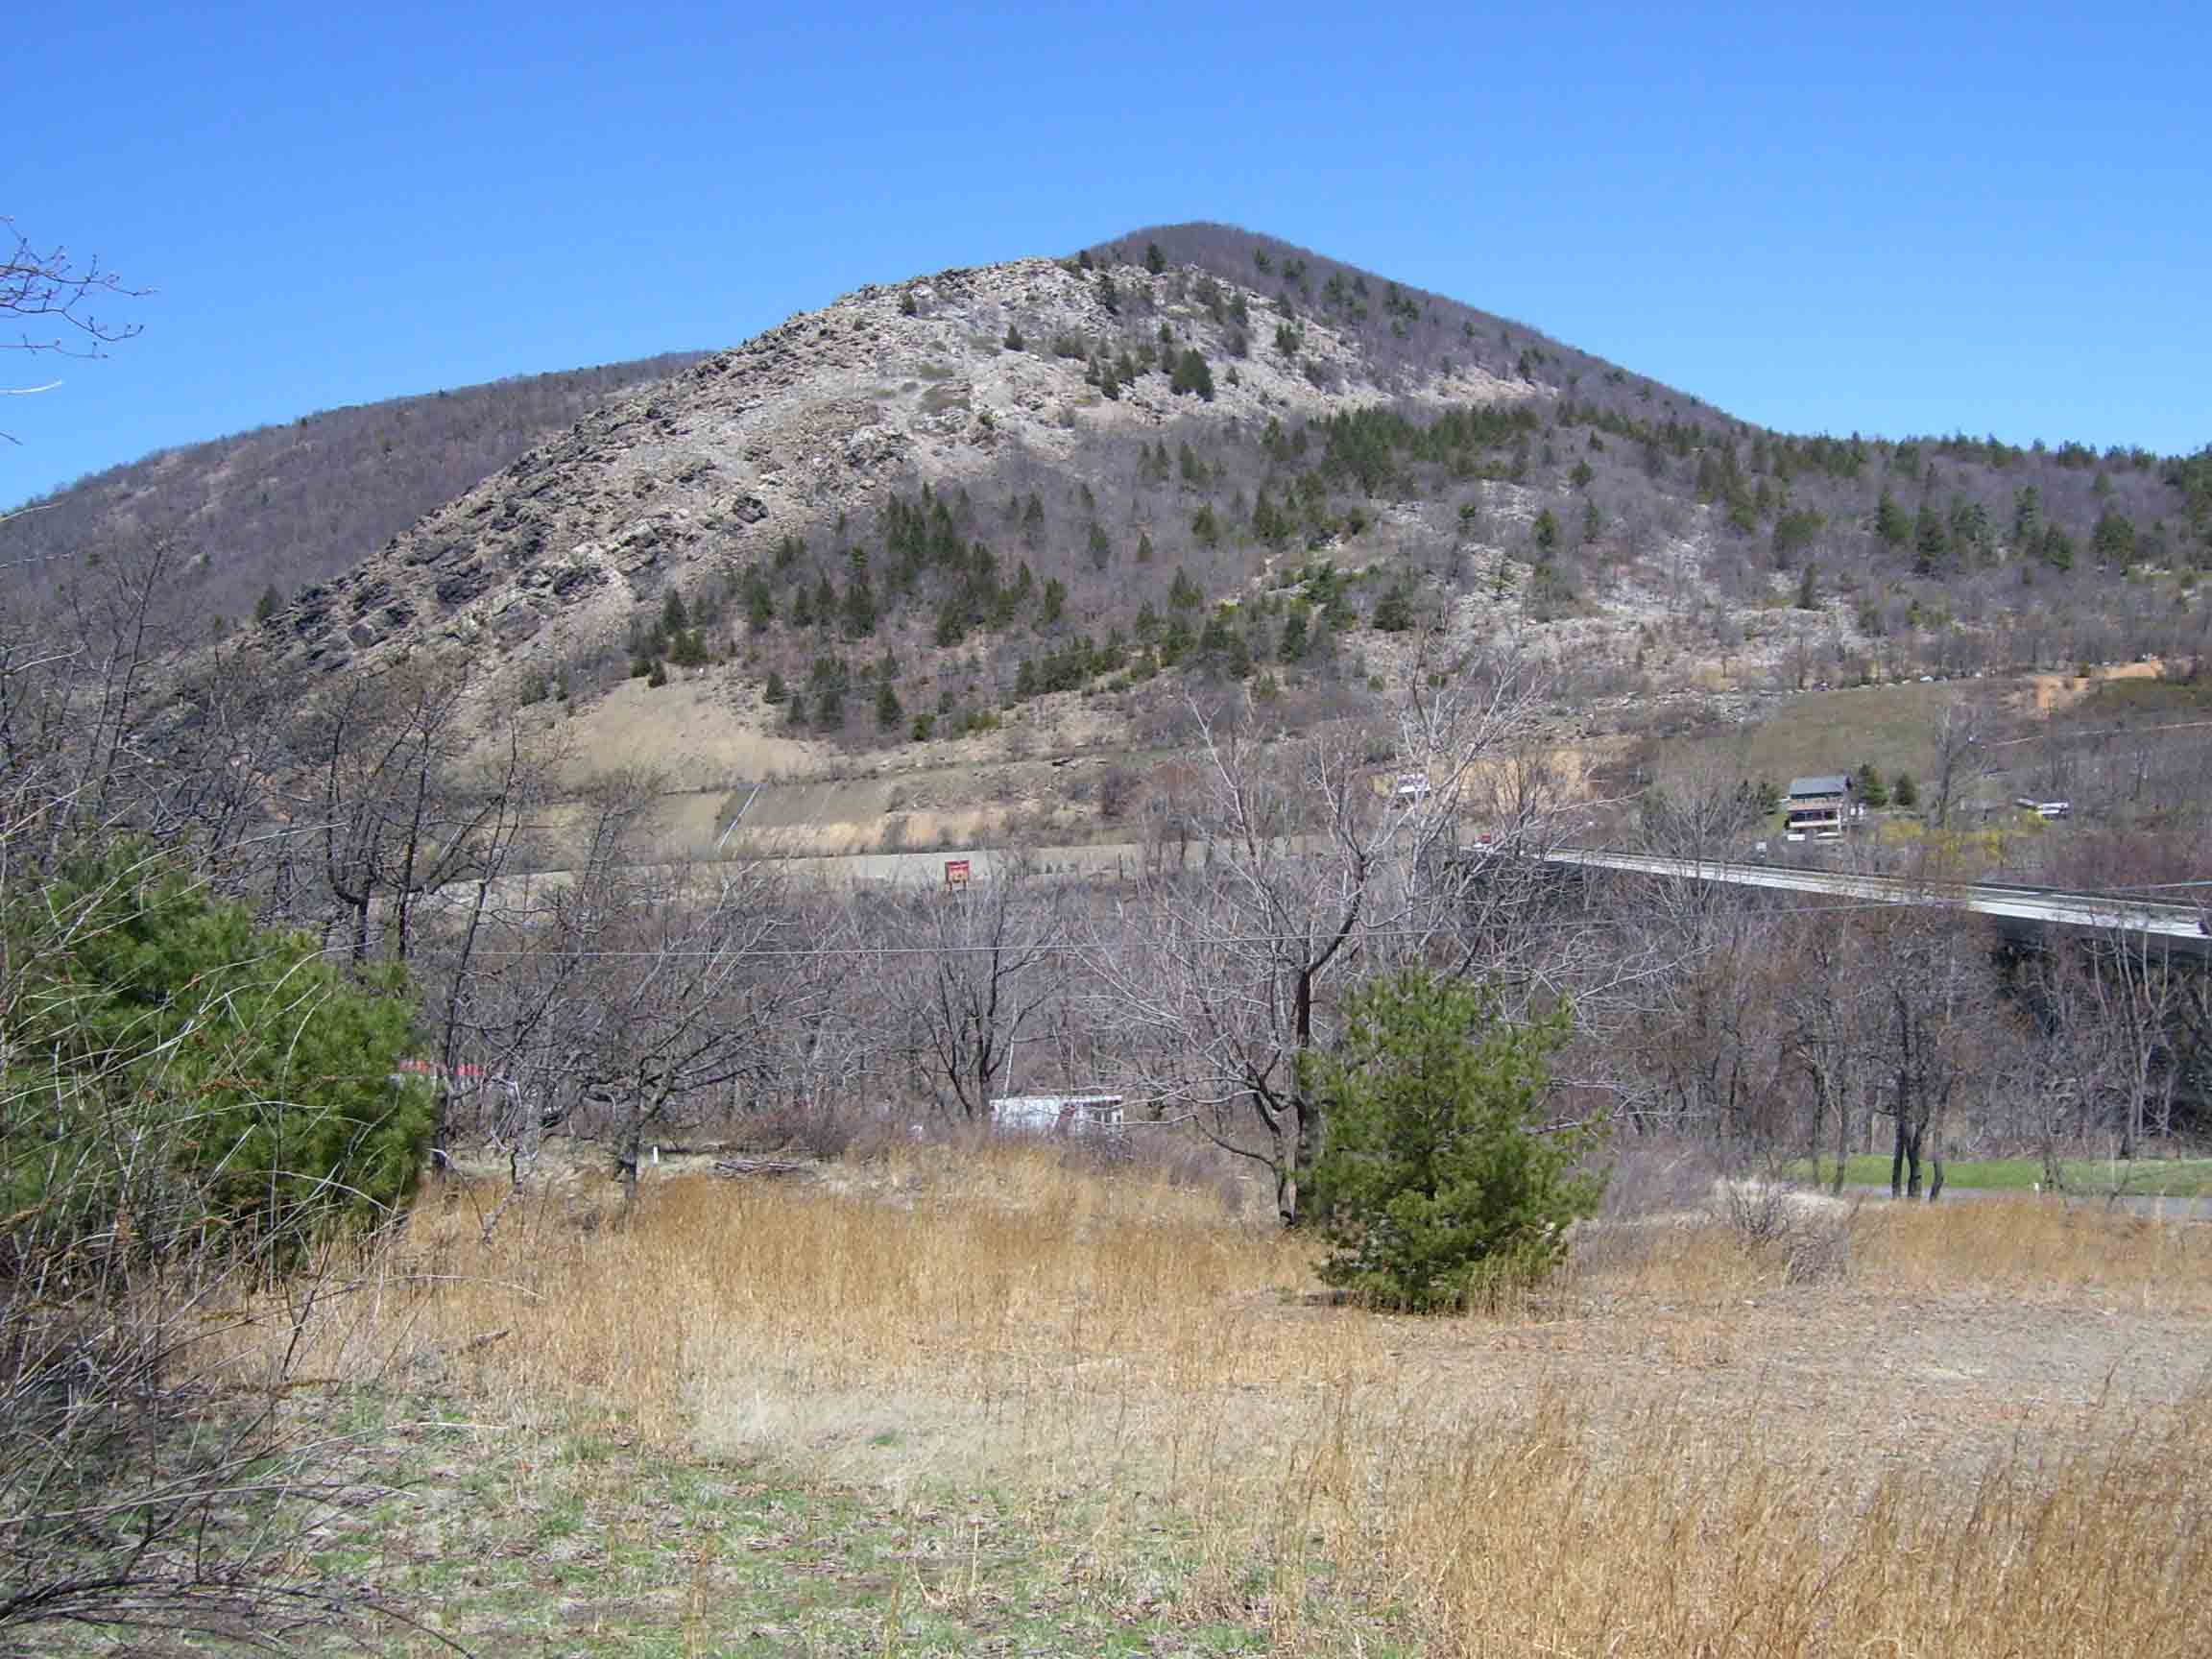 View to the east across Lehigh Gap. The northbound trail climbs the ridge on the other side of the Lehigh River. Taken at approx. mm 0.1.  Courtesy dlcul@conncoll.edu